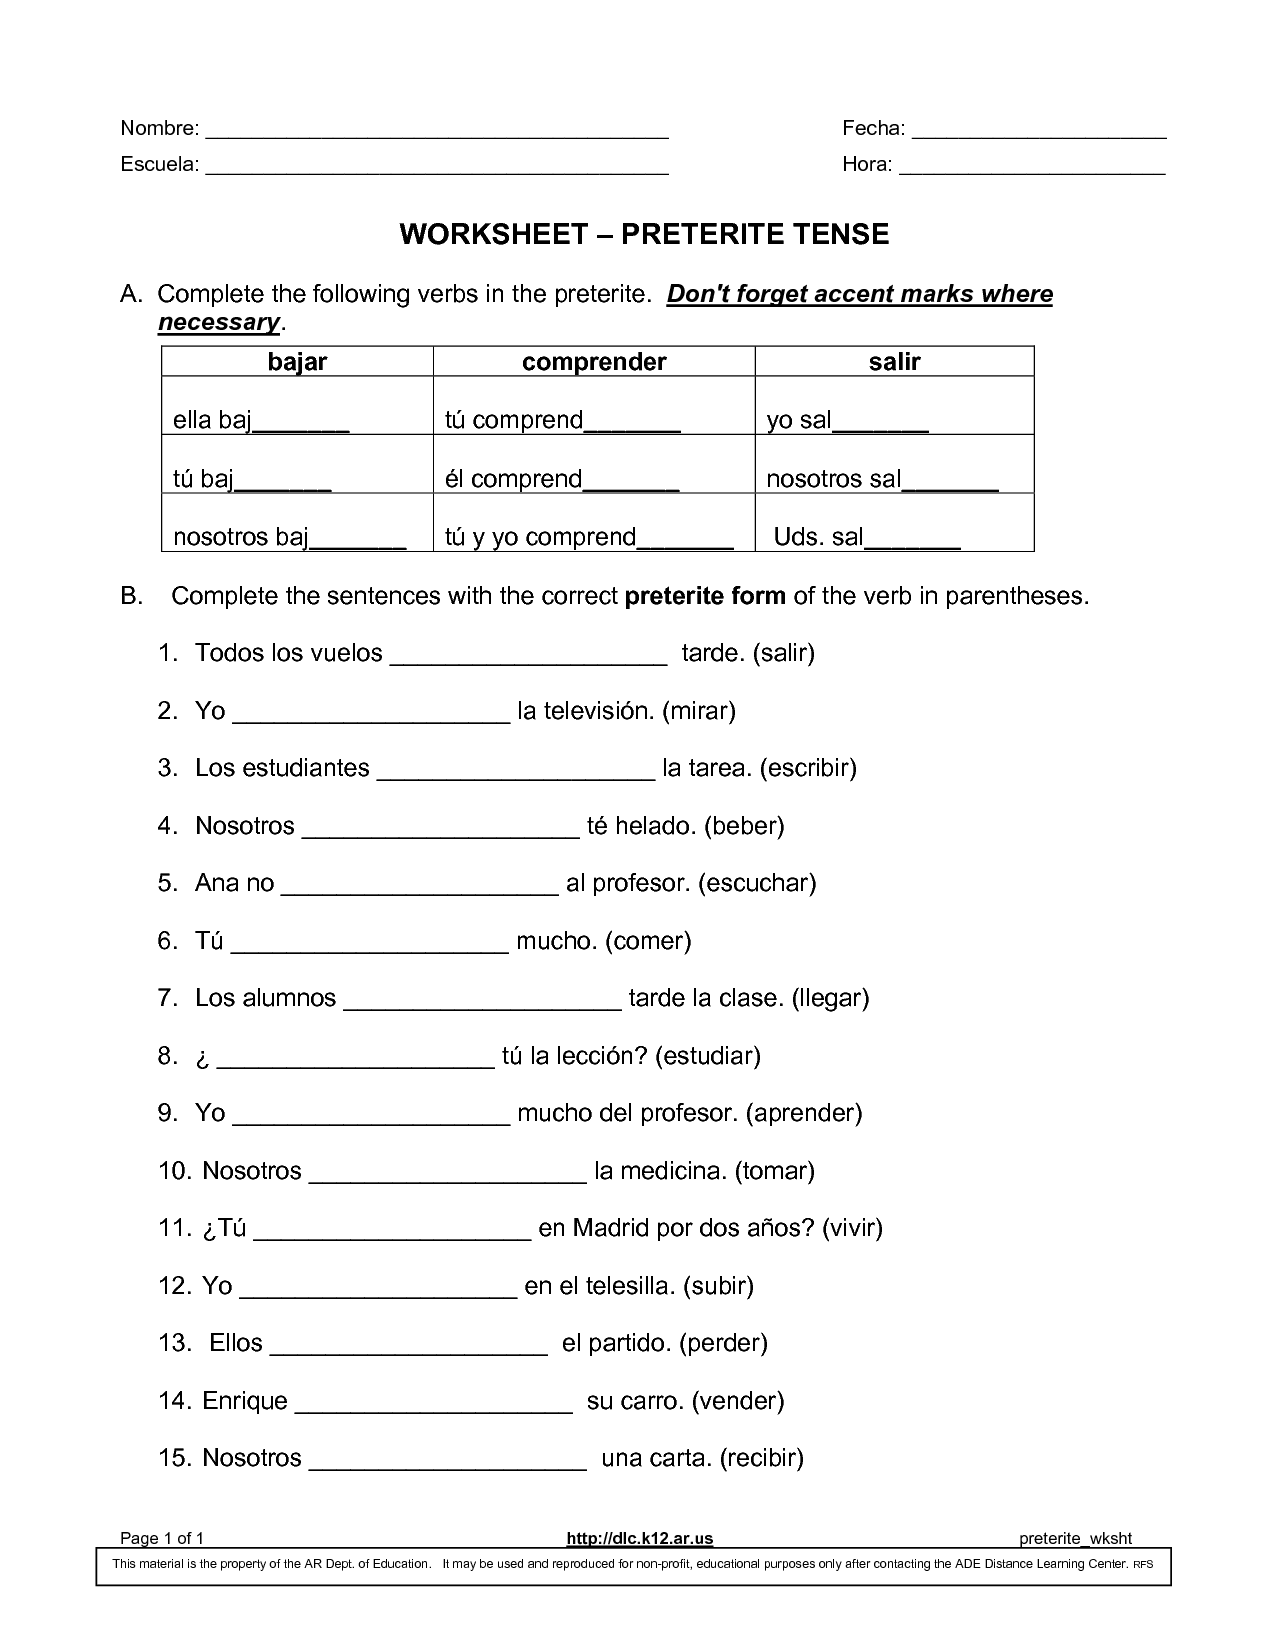 Worksheet 5 10 Preterite Tense Of Hacer And Decir Answers